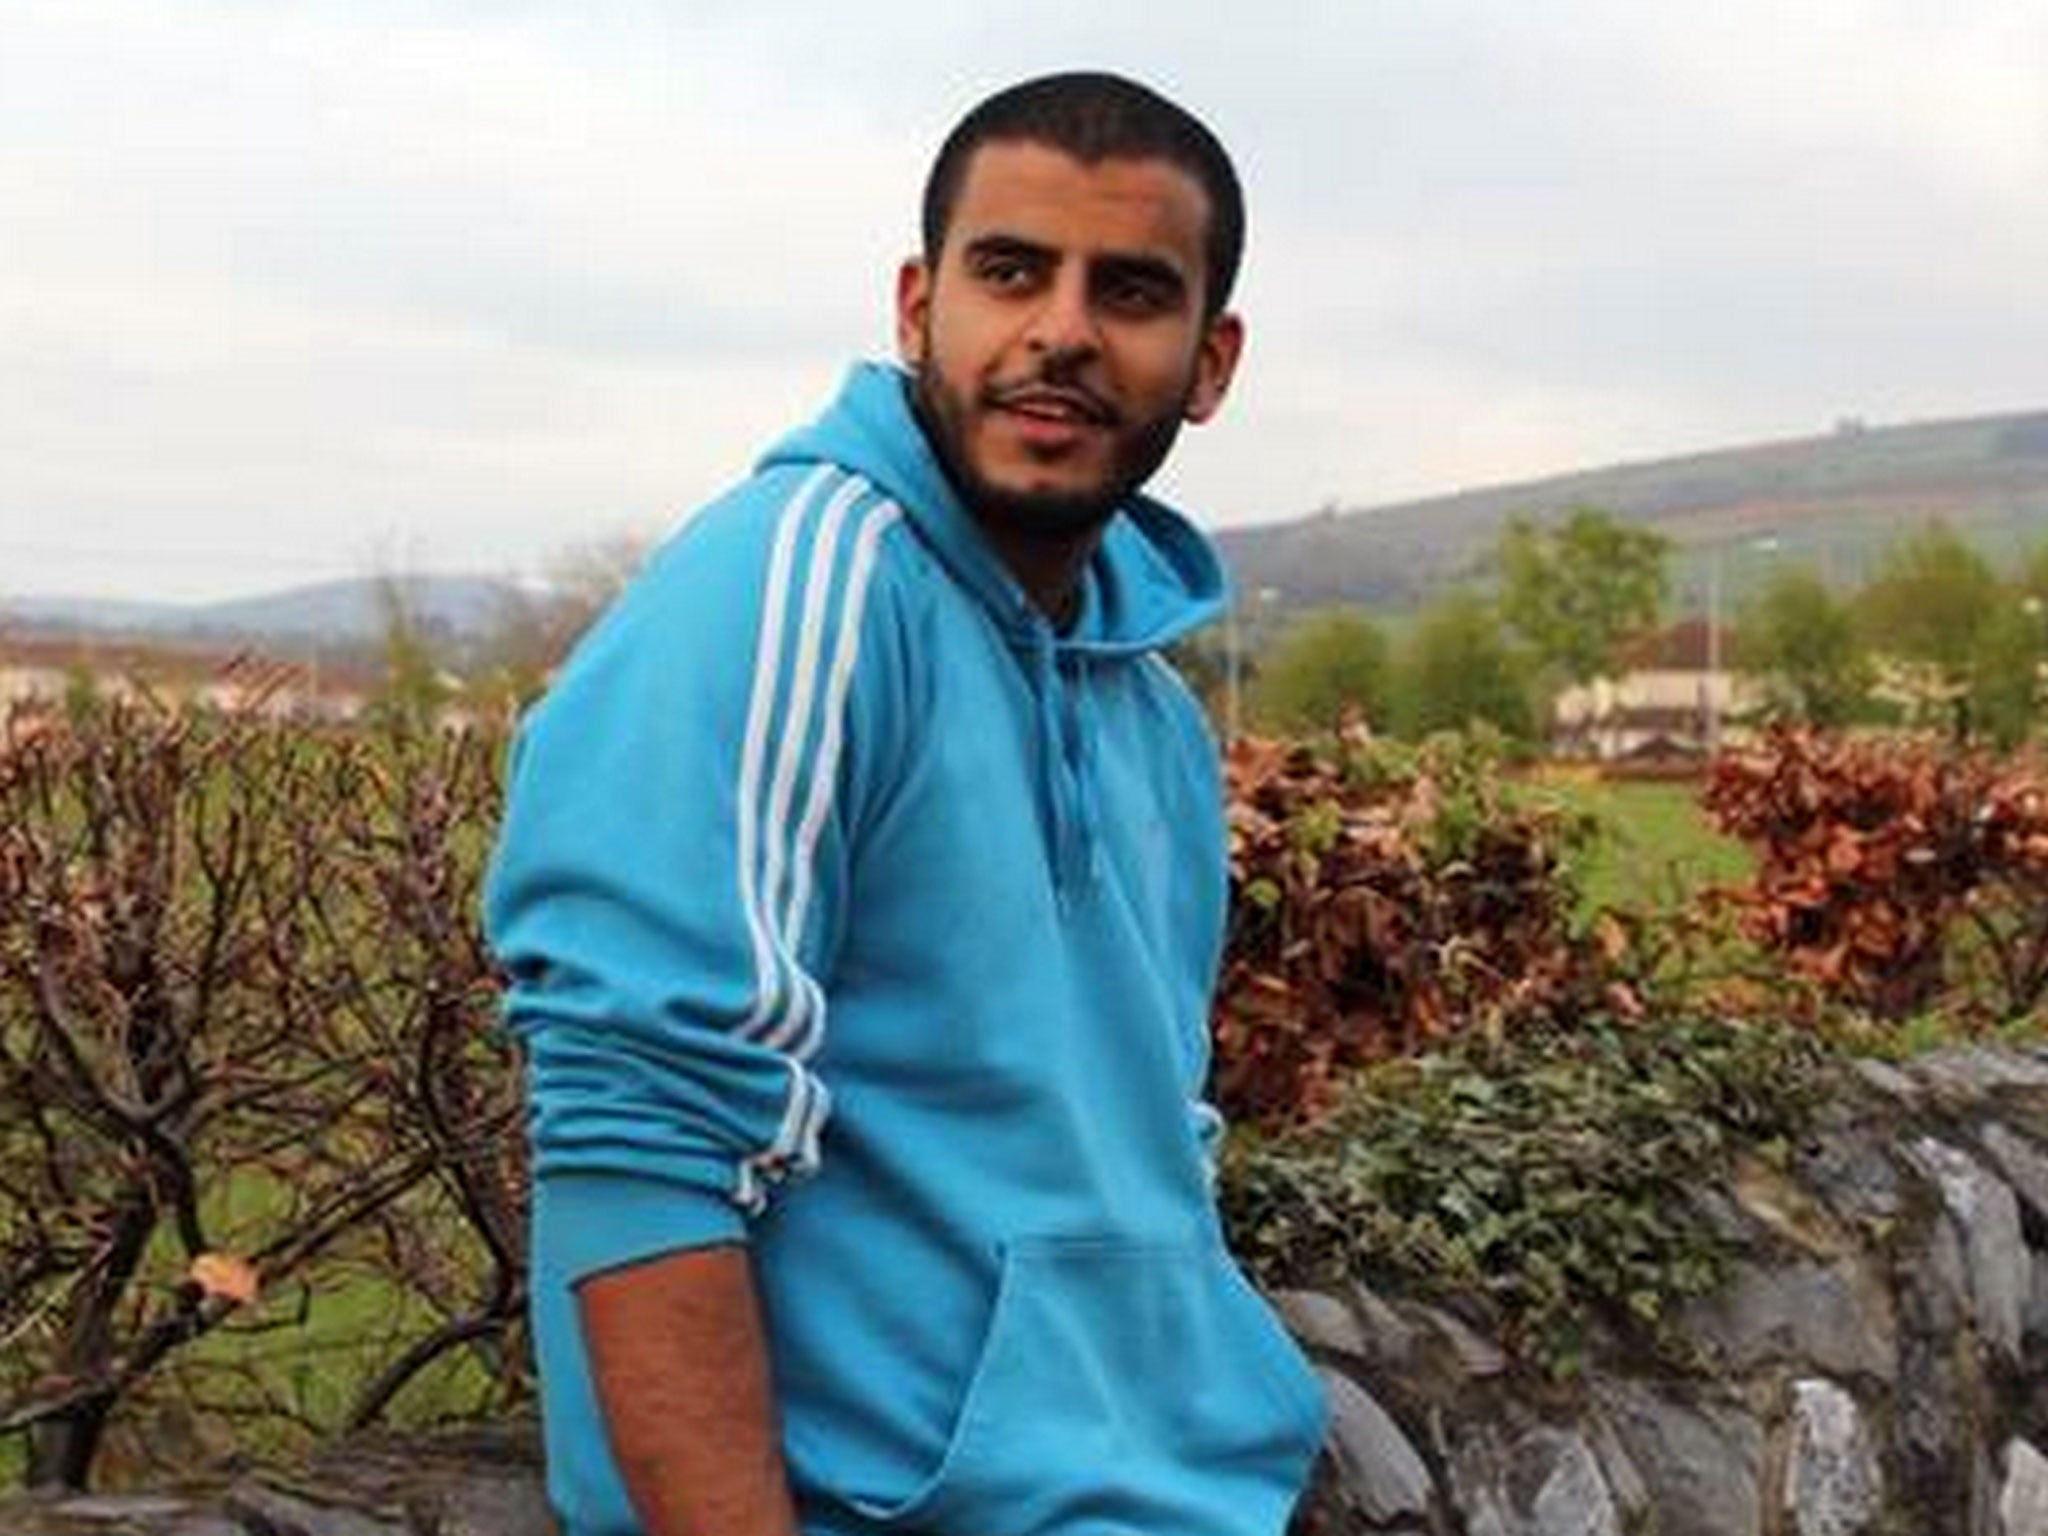 Mr Halawa, now aged 21, was on a family holiday at the time of the arrest